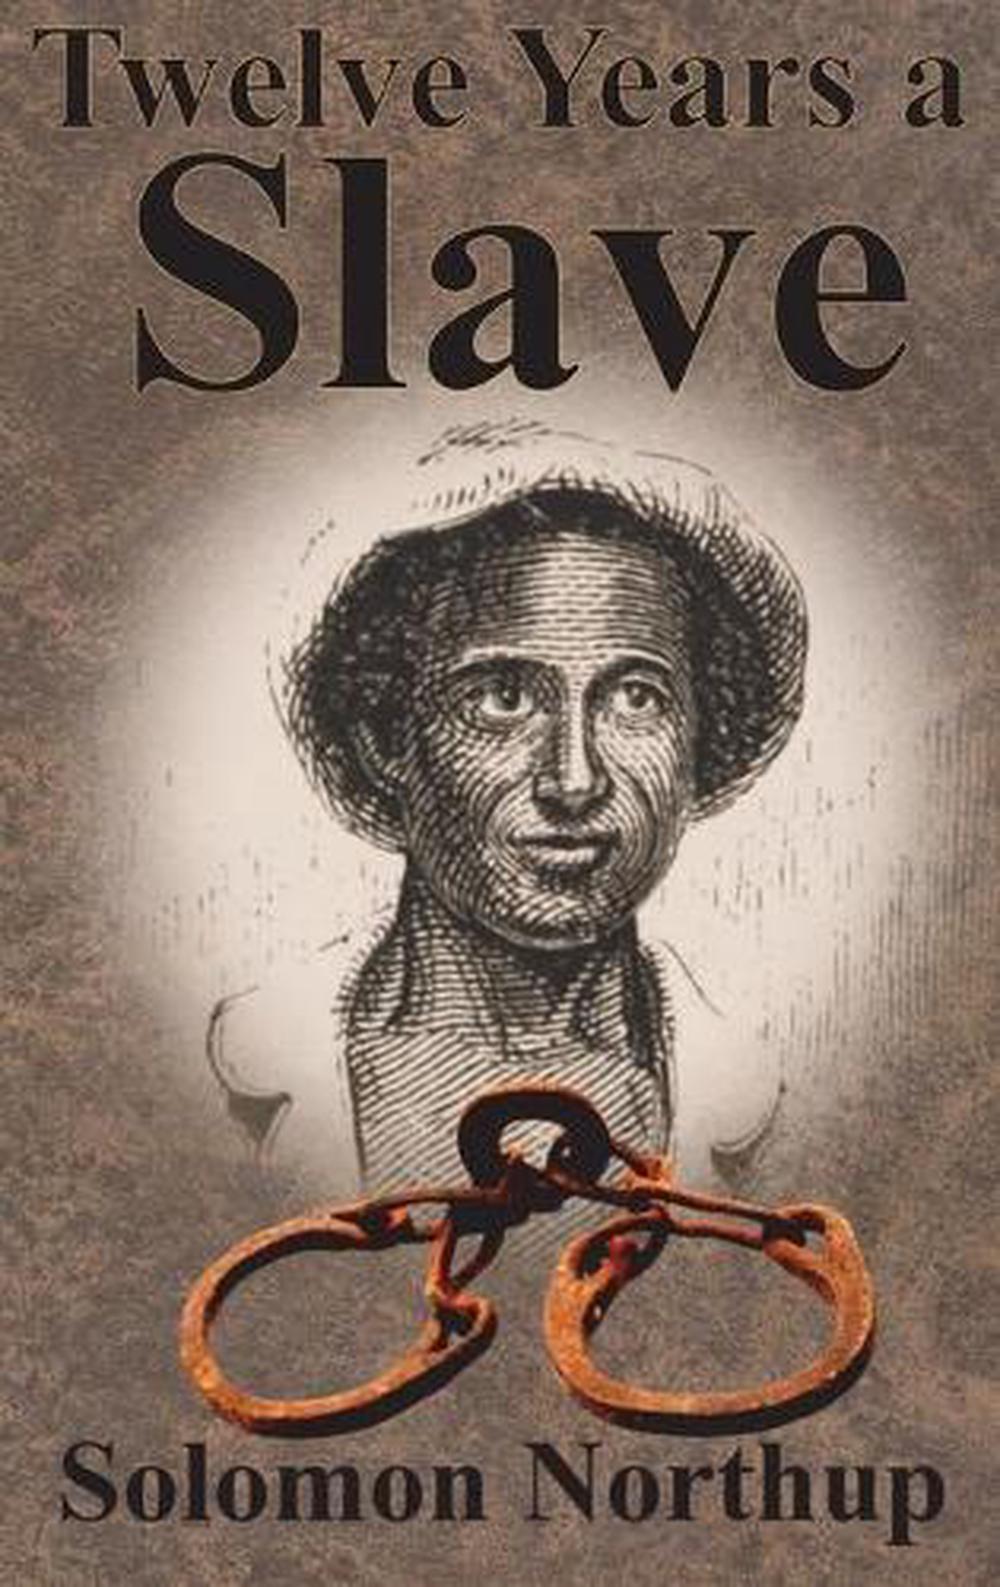 12 years a slave download pdf